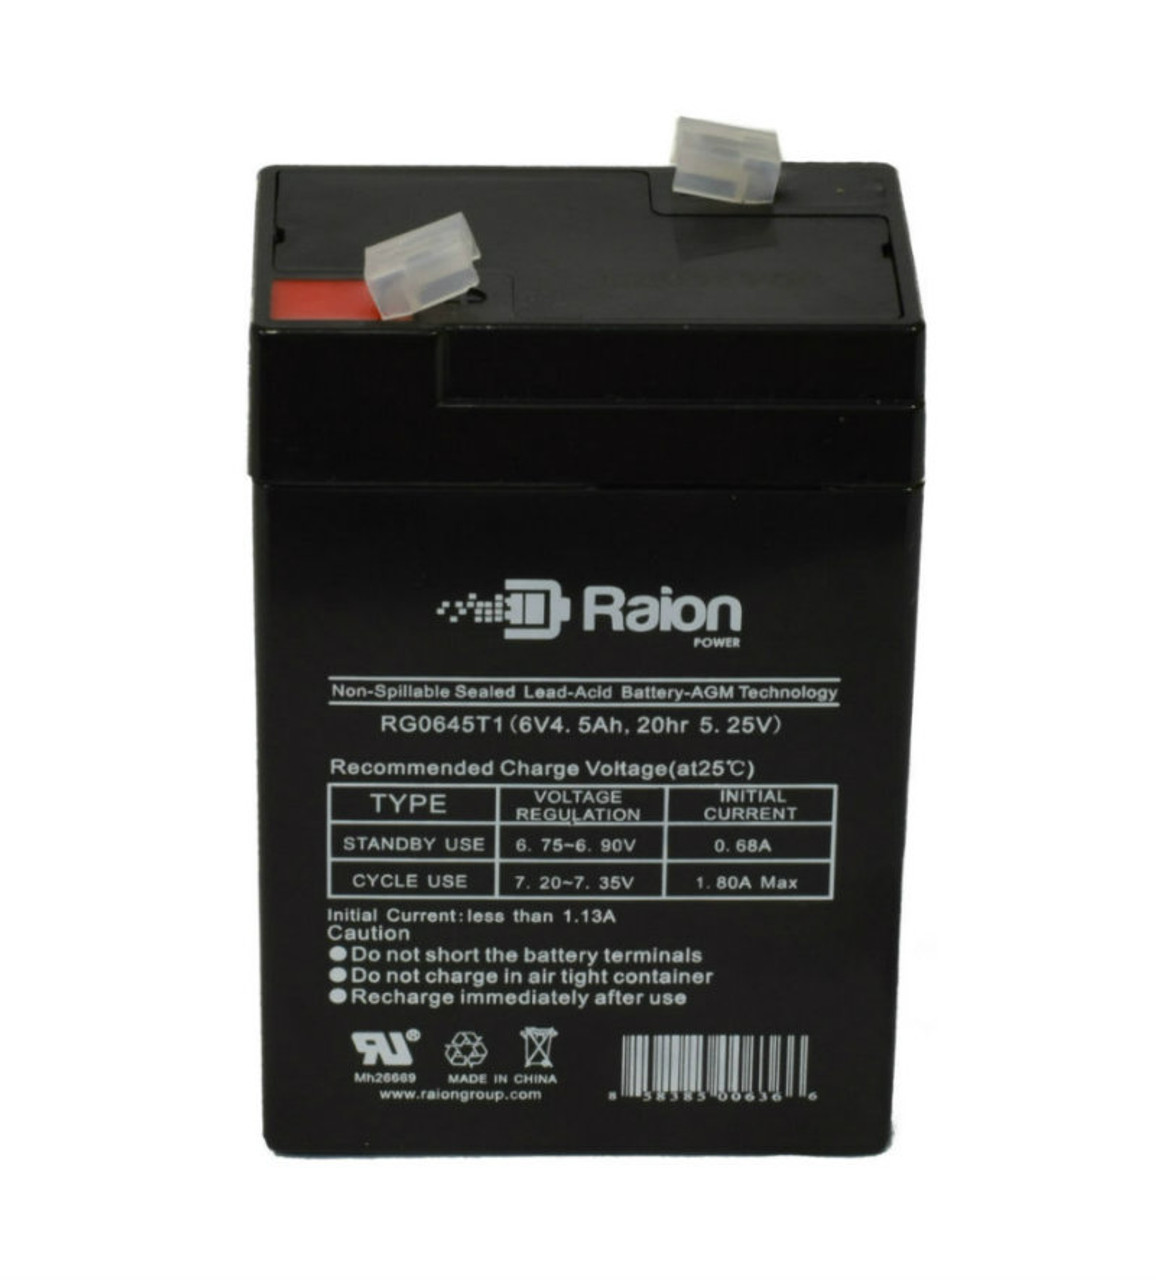 Raion Power RG0645T1 Replacement Battery Cartridge for Power Energy GB6-4